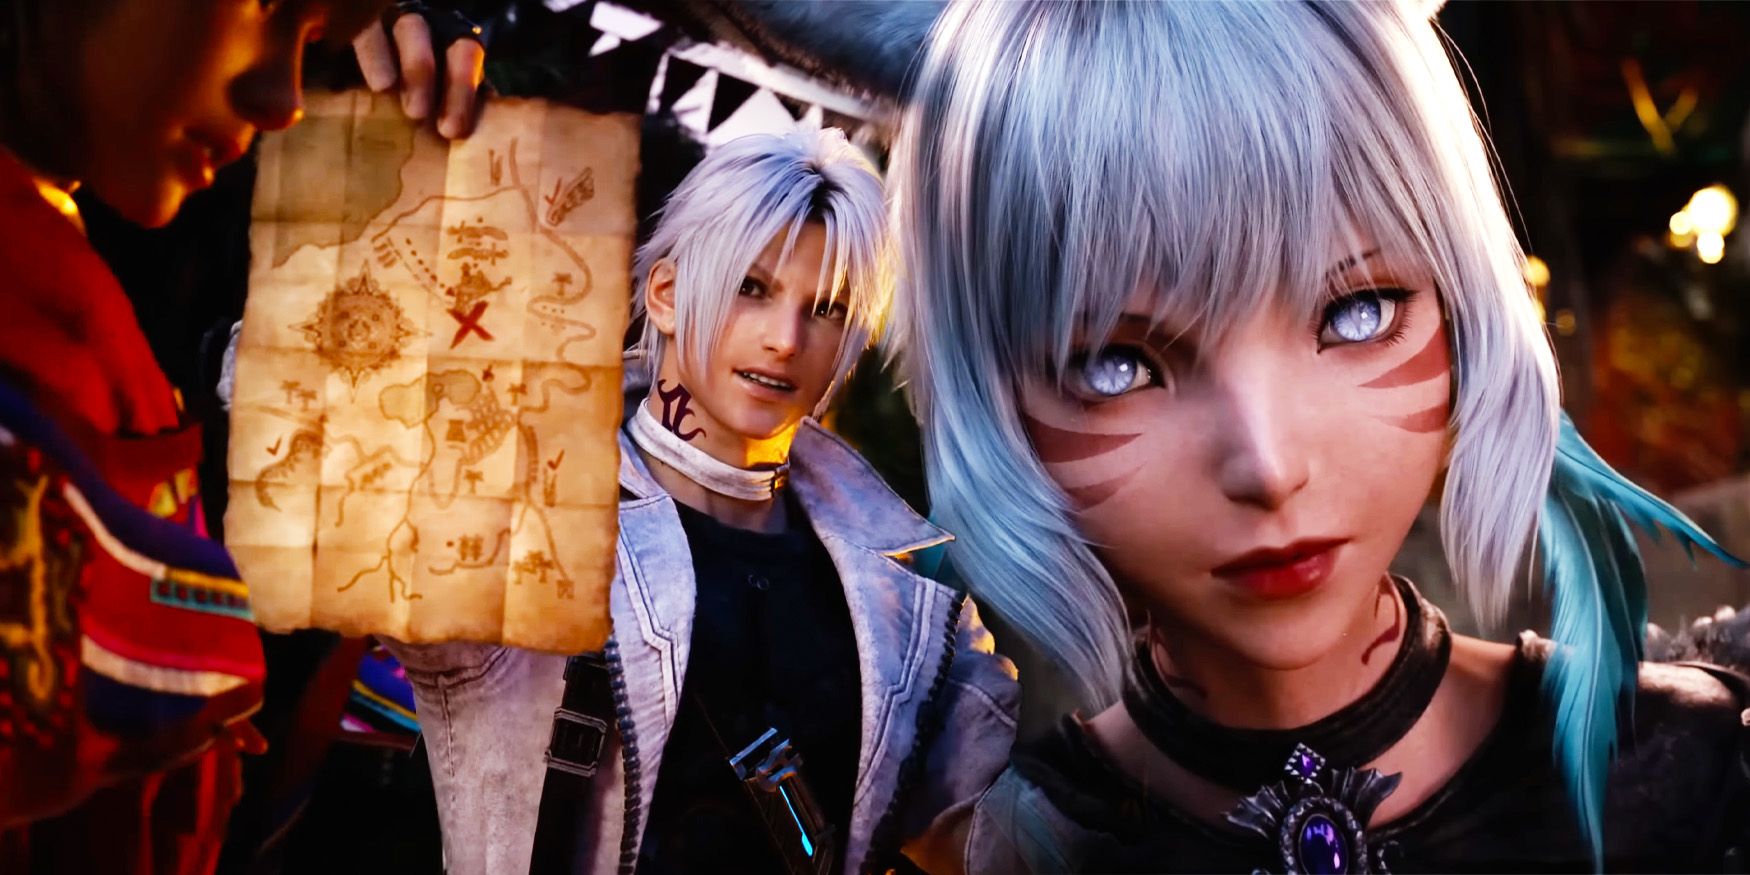 Y'shtola beside Thancred holding up a map.